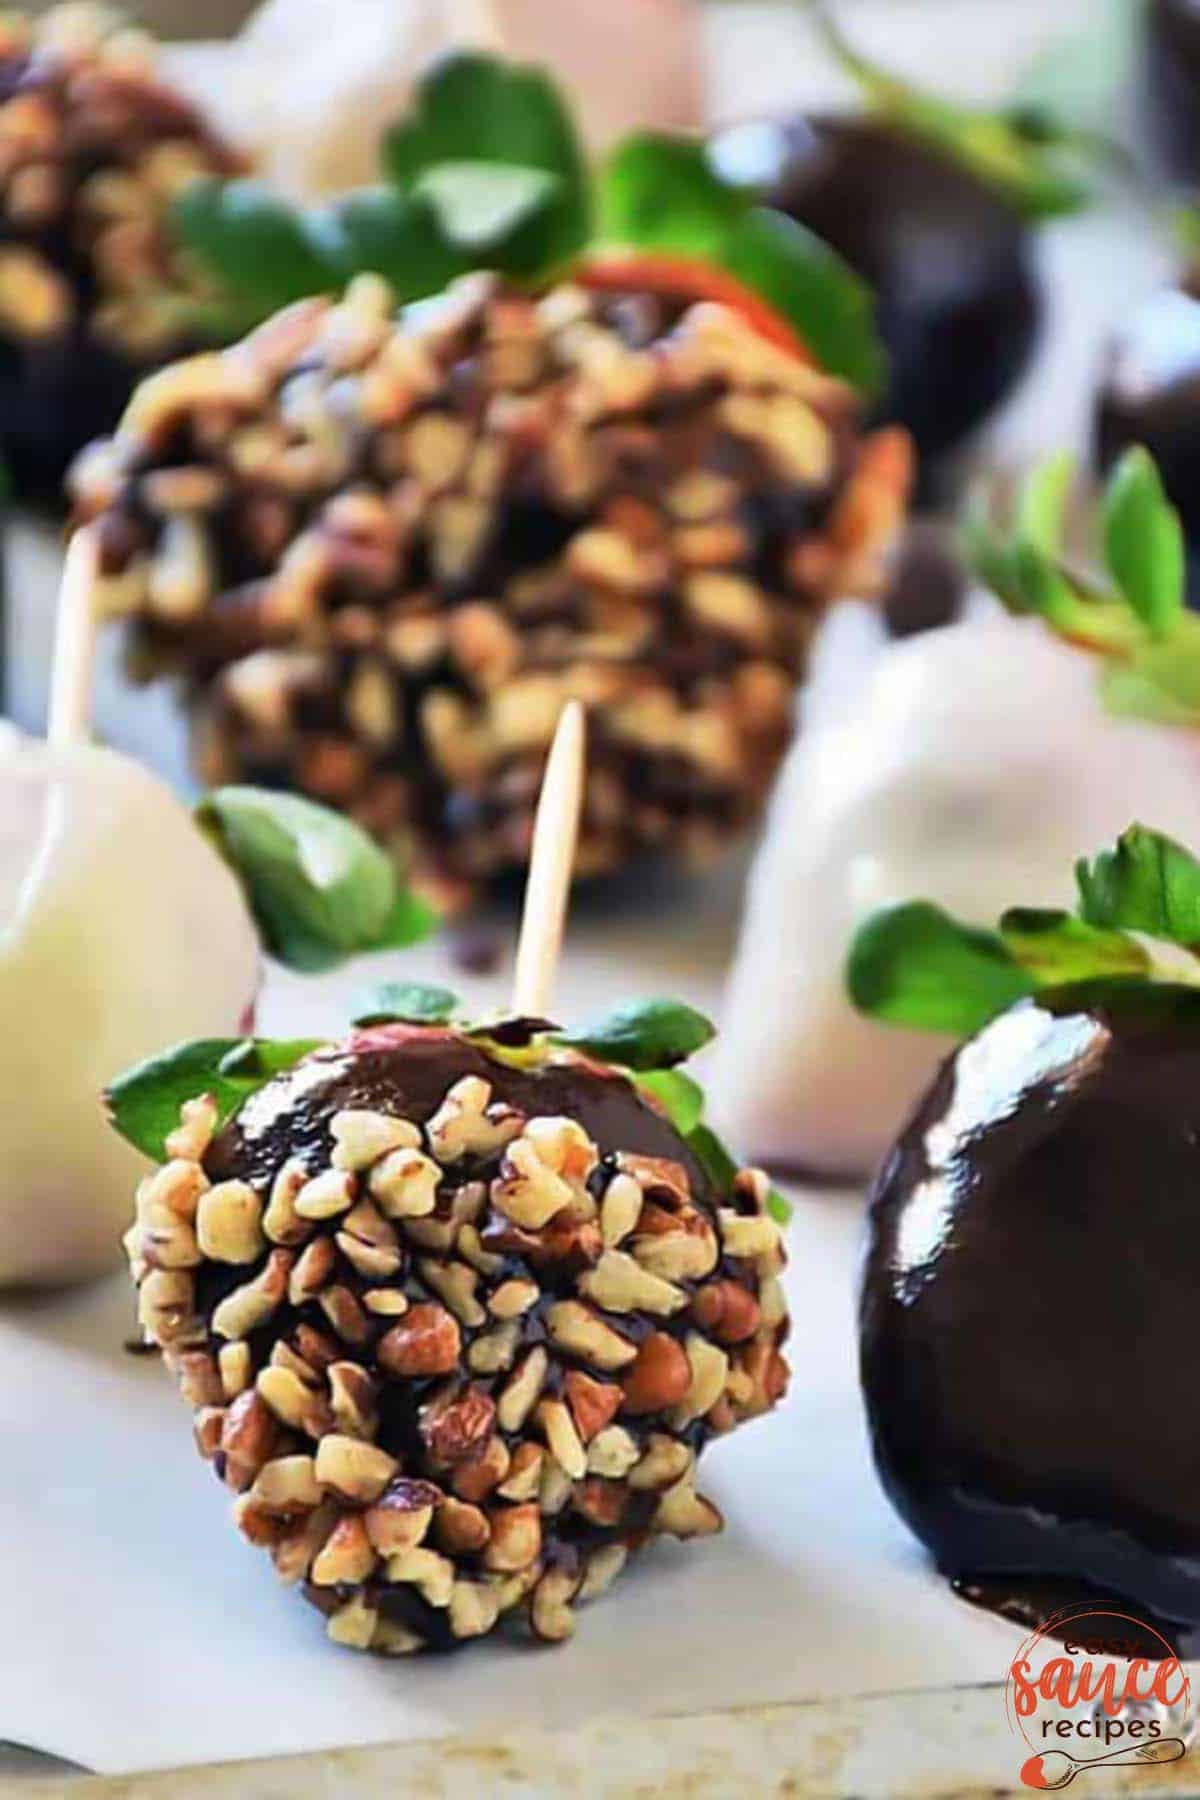 chocolate ganache covered strawberries with nuts